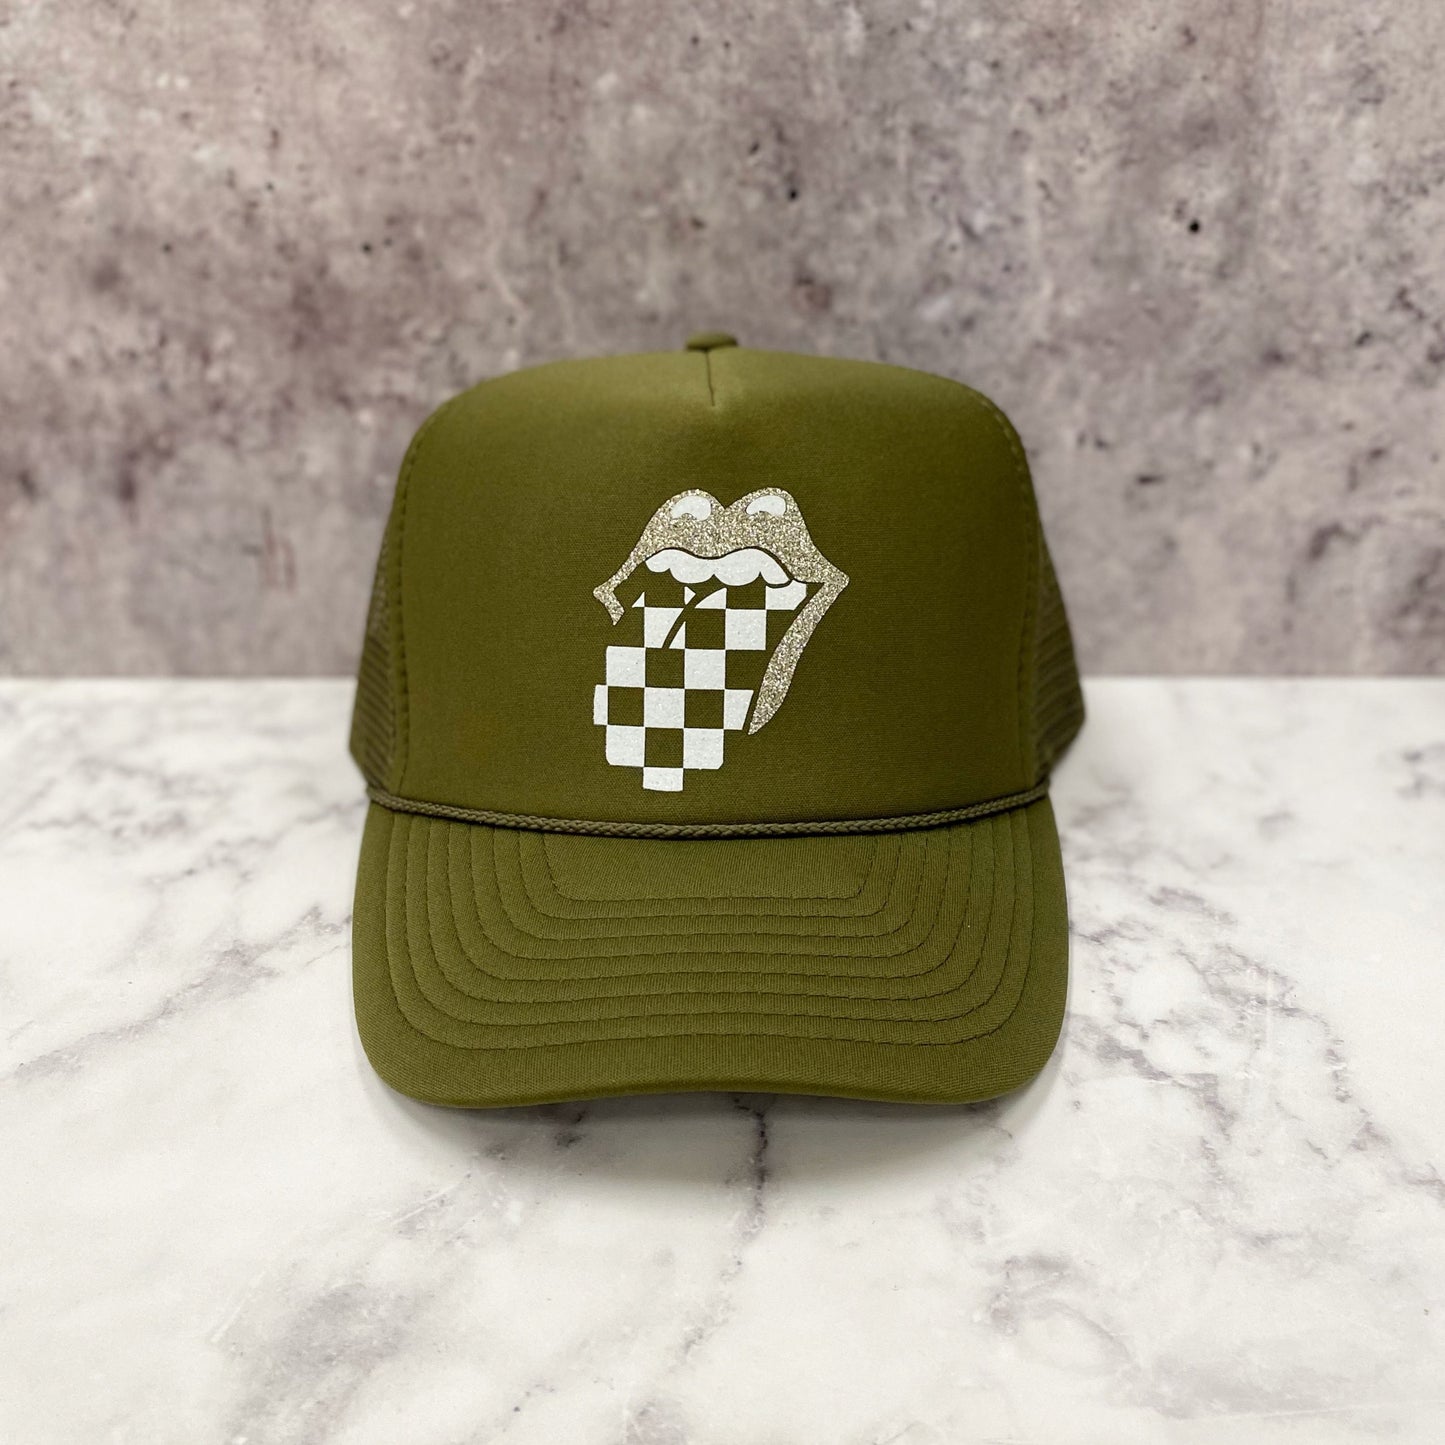 Rolling Stones Checkered Tongue Trucker